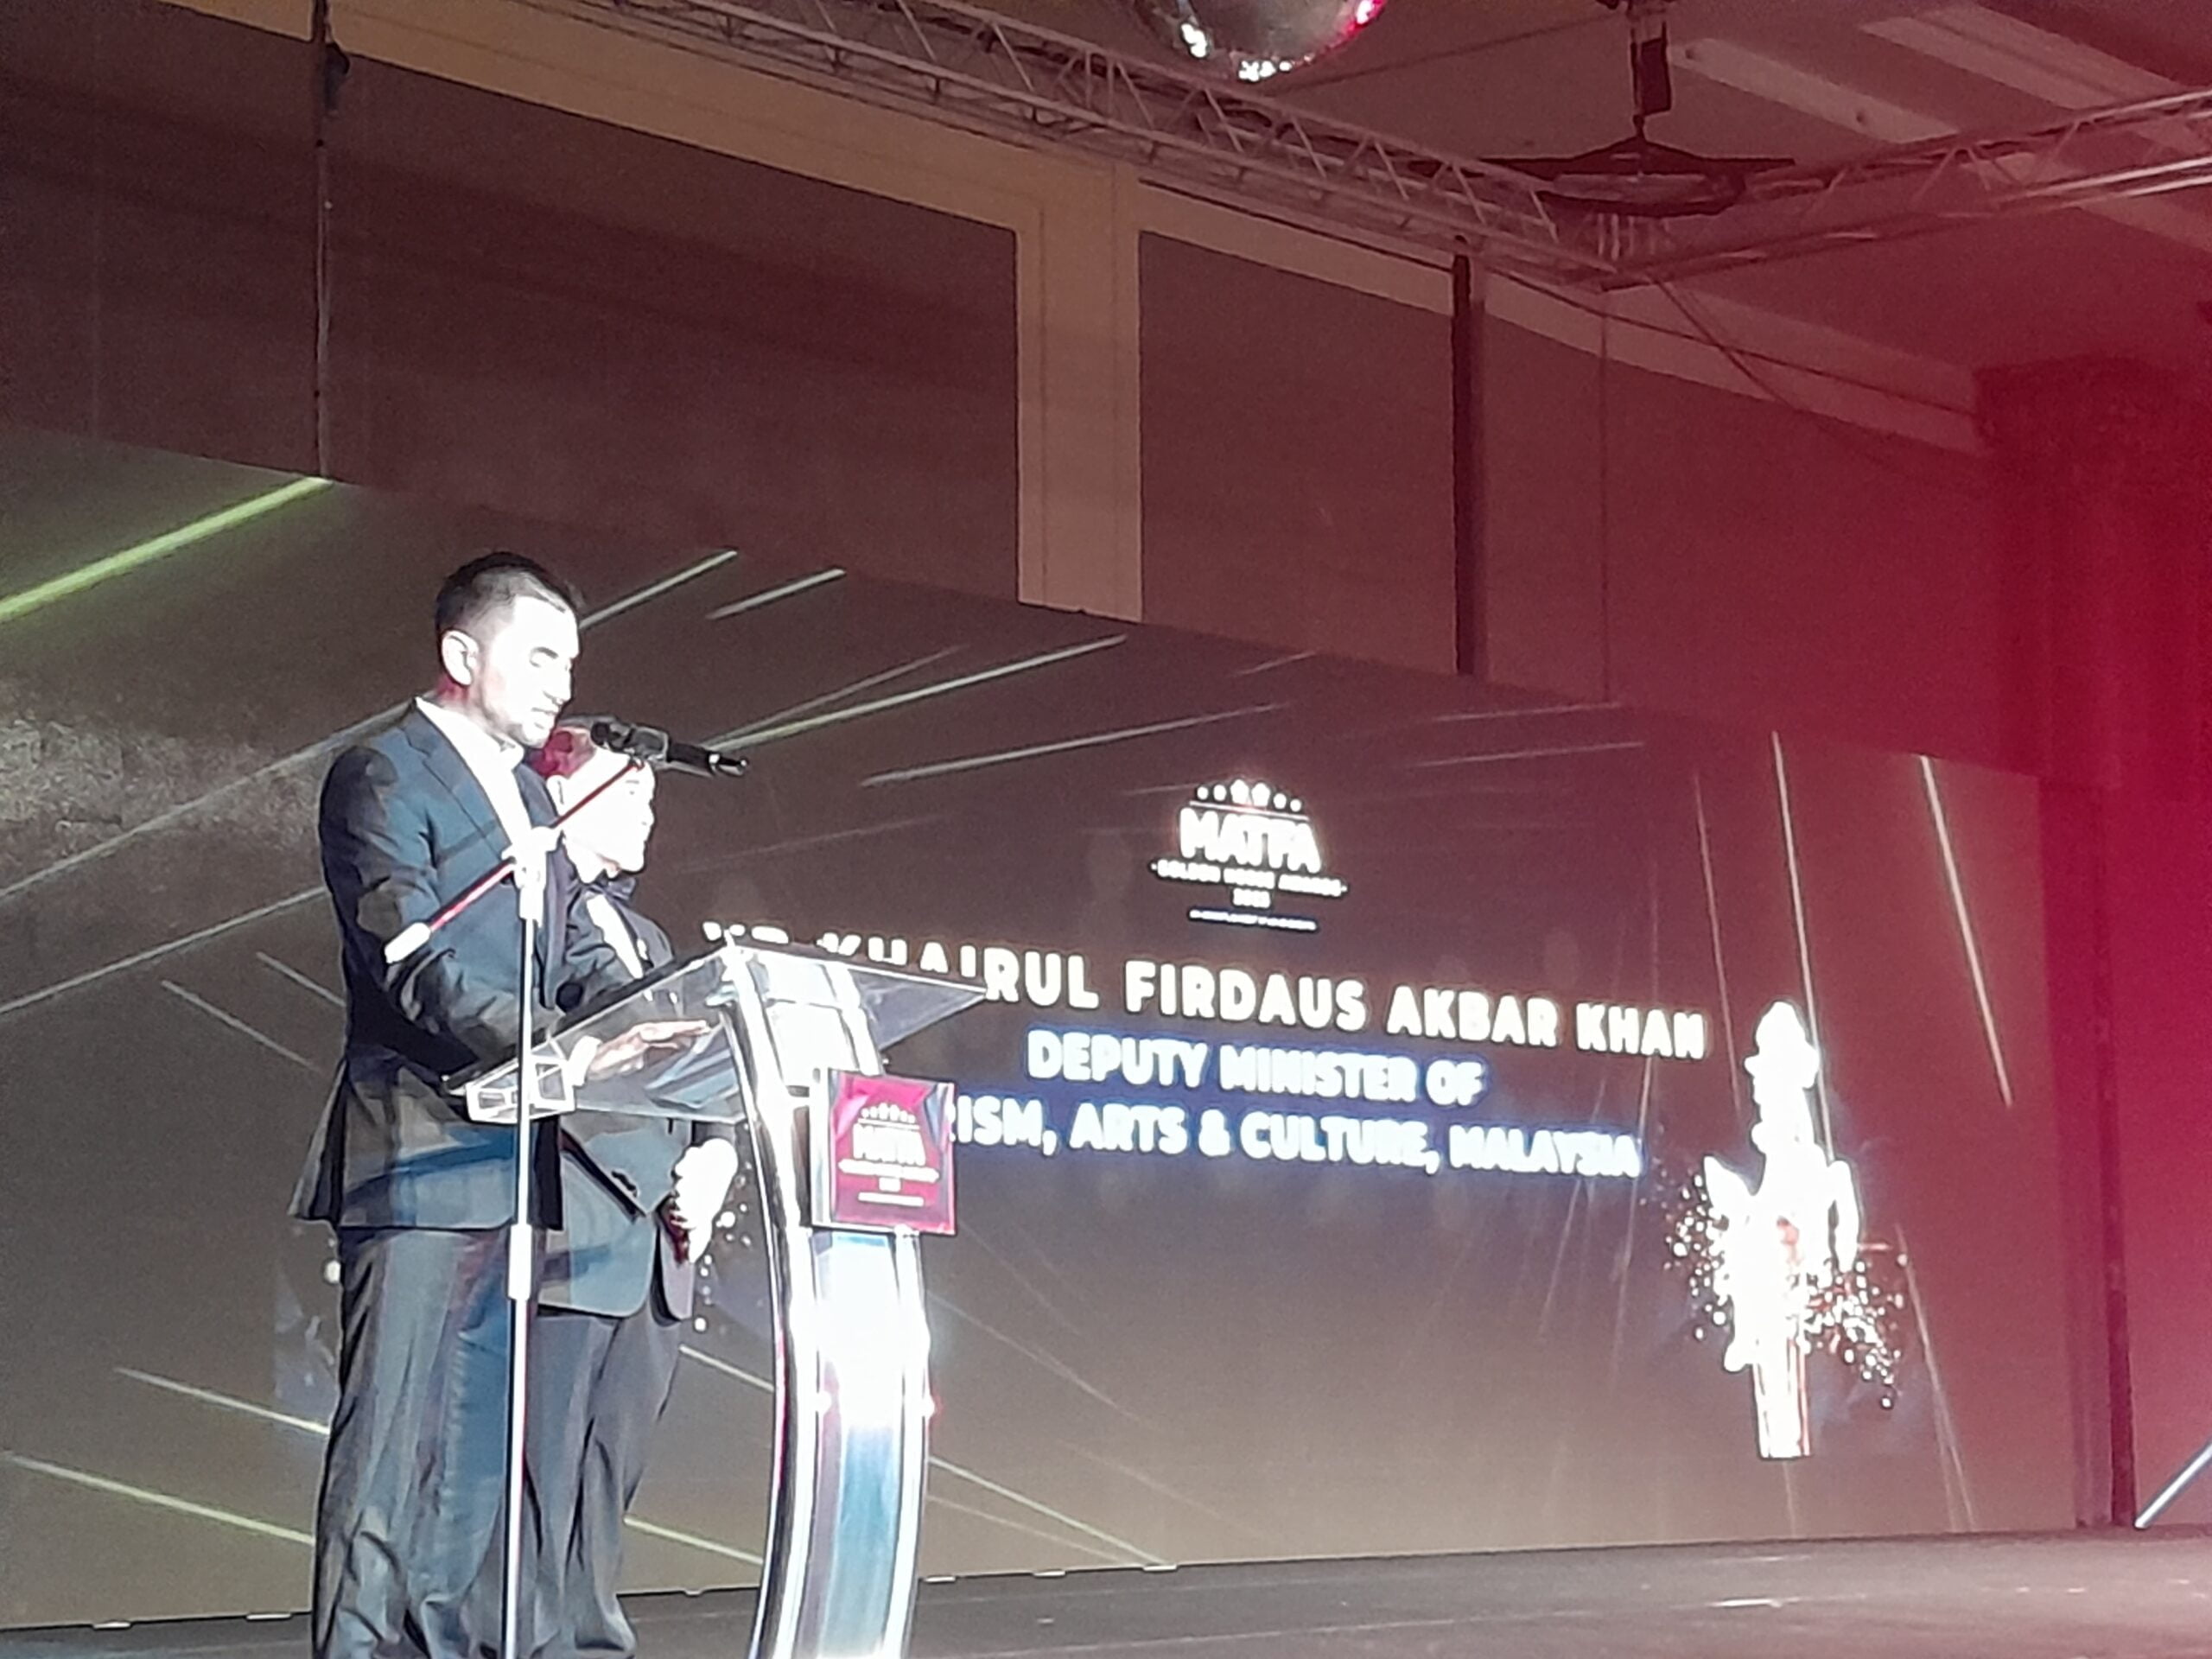 Khairul Firdaus: Theme park, family attraction industry important hub for Malaysian tourism